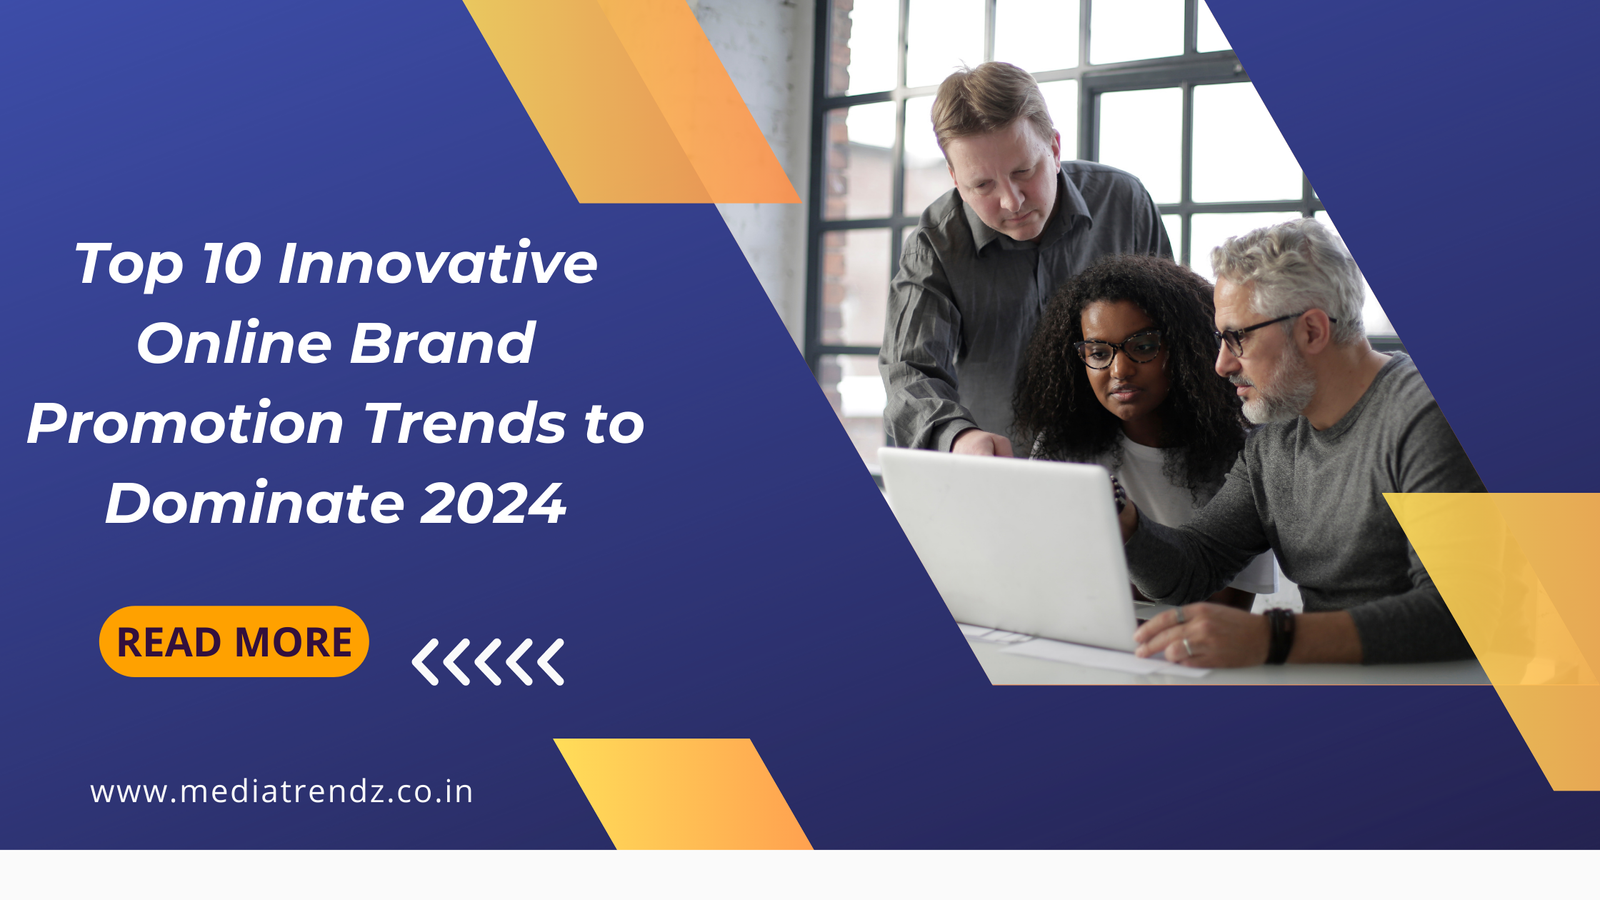 Top 10 Innovative Online Brand Promotion Trends to Dominate 2024